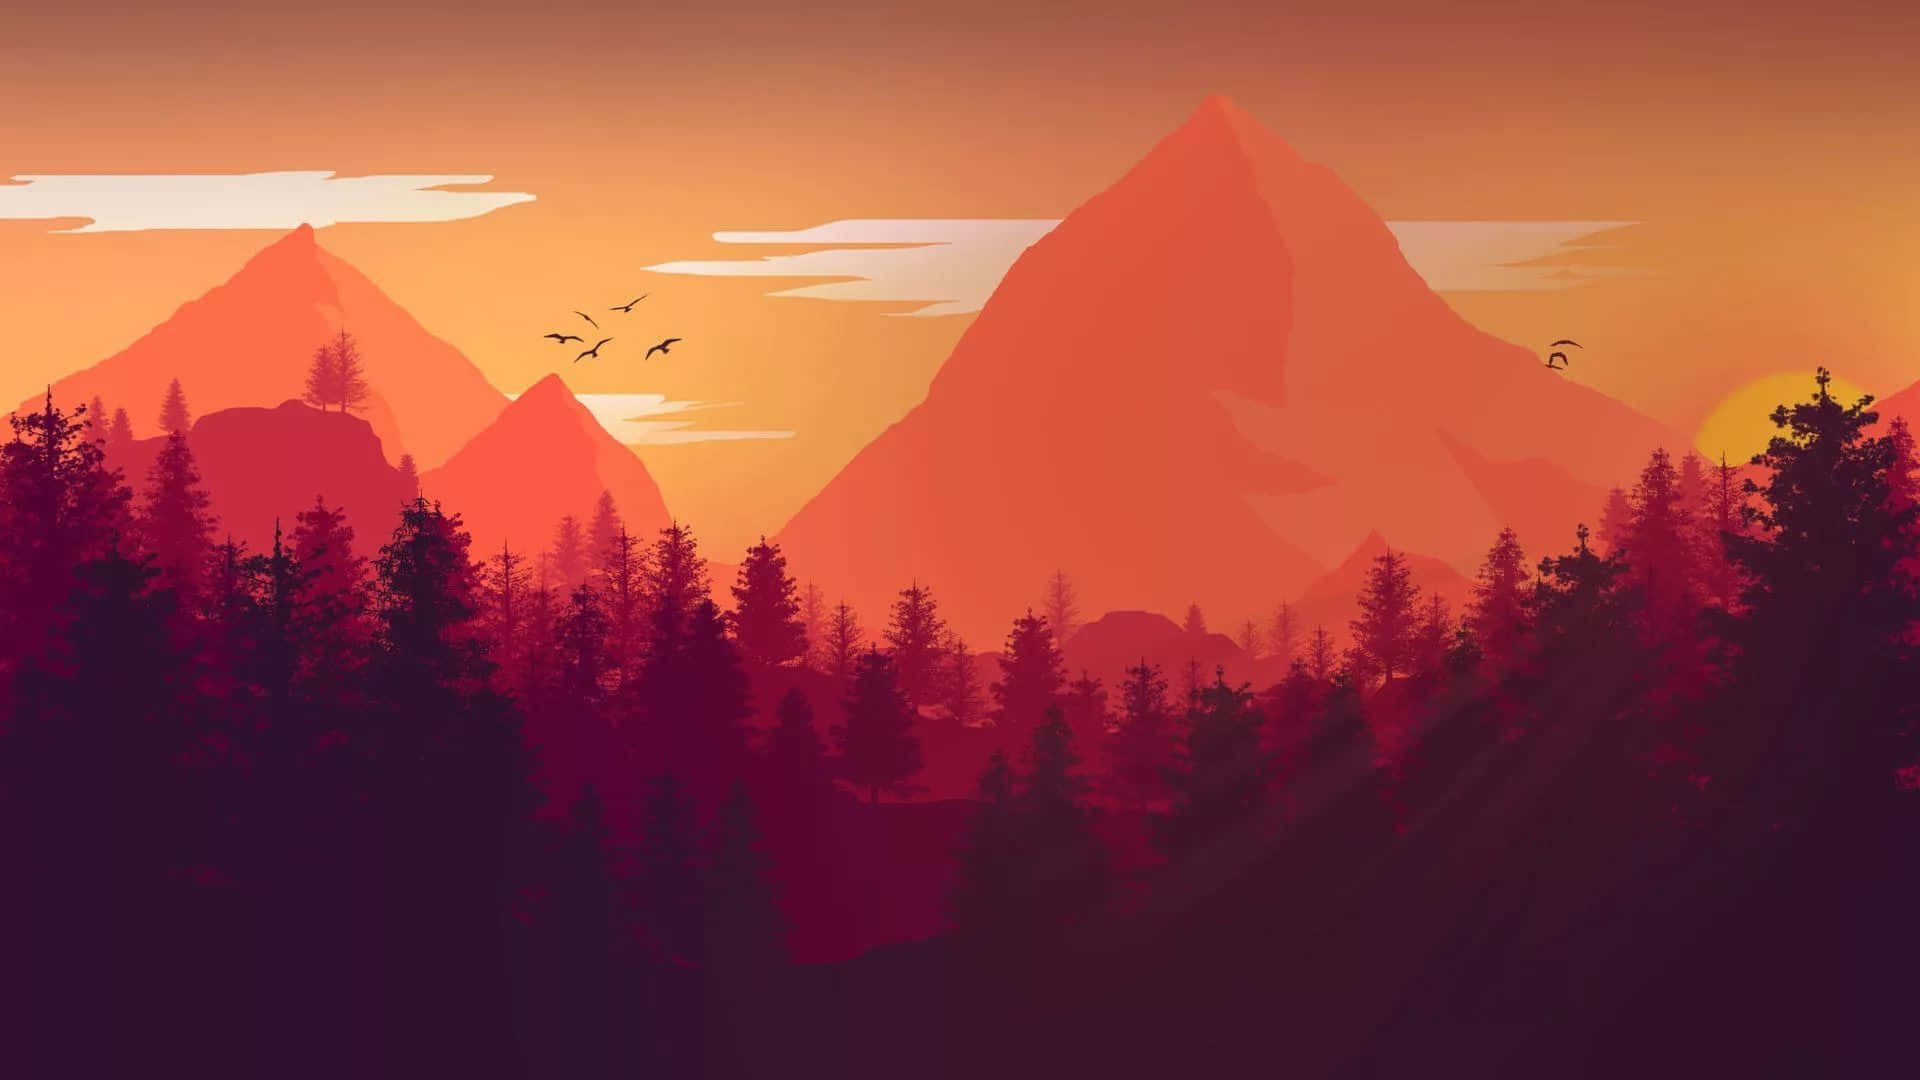 A Mountain Landscape With Birds And Trees At Sunset